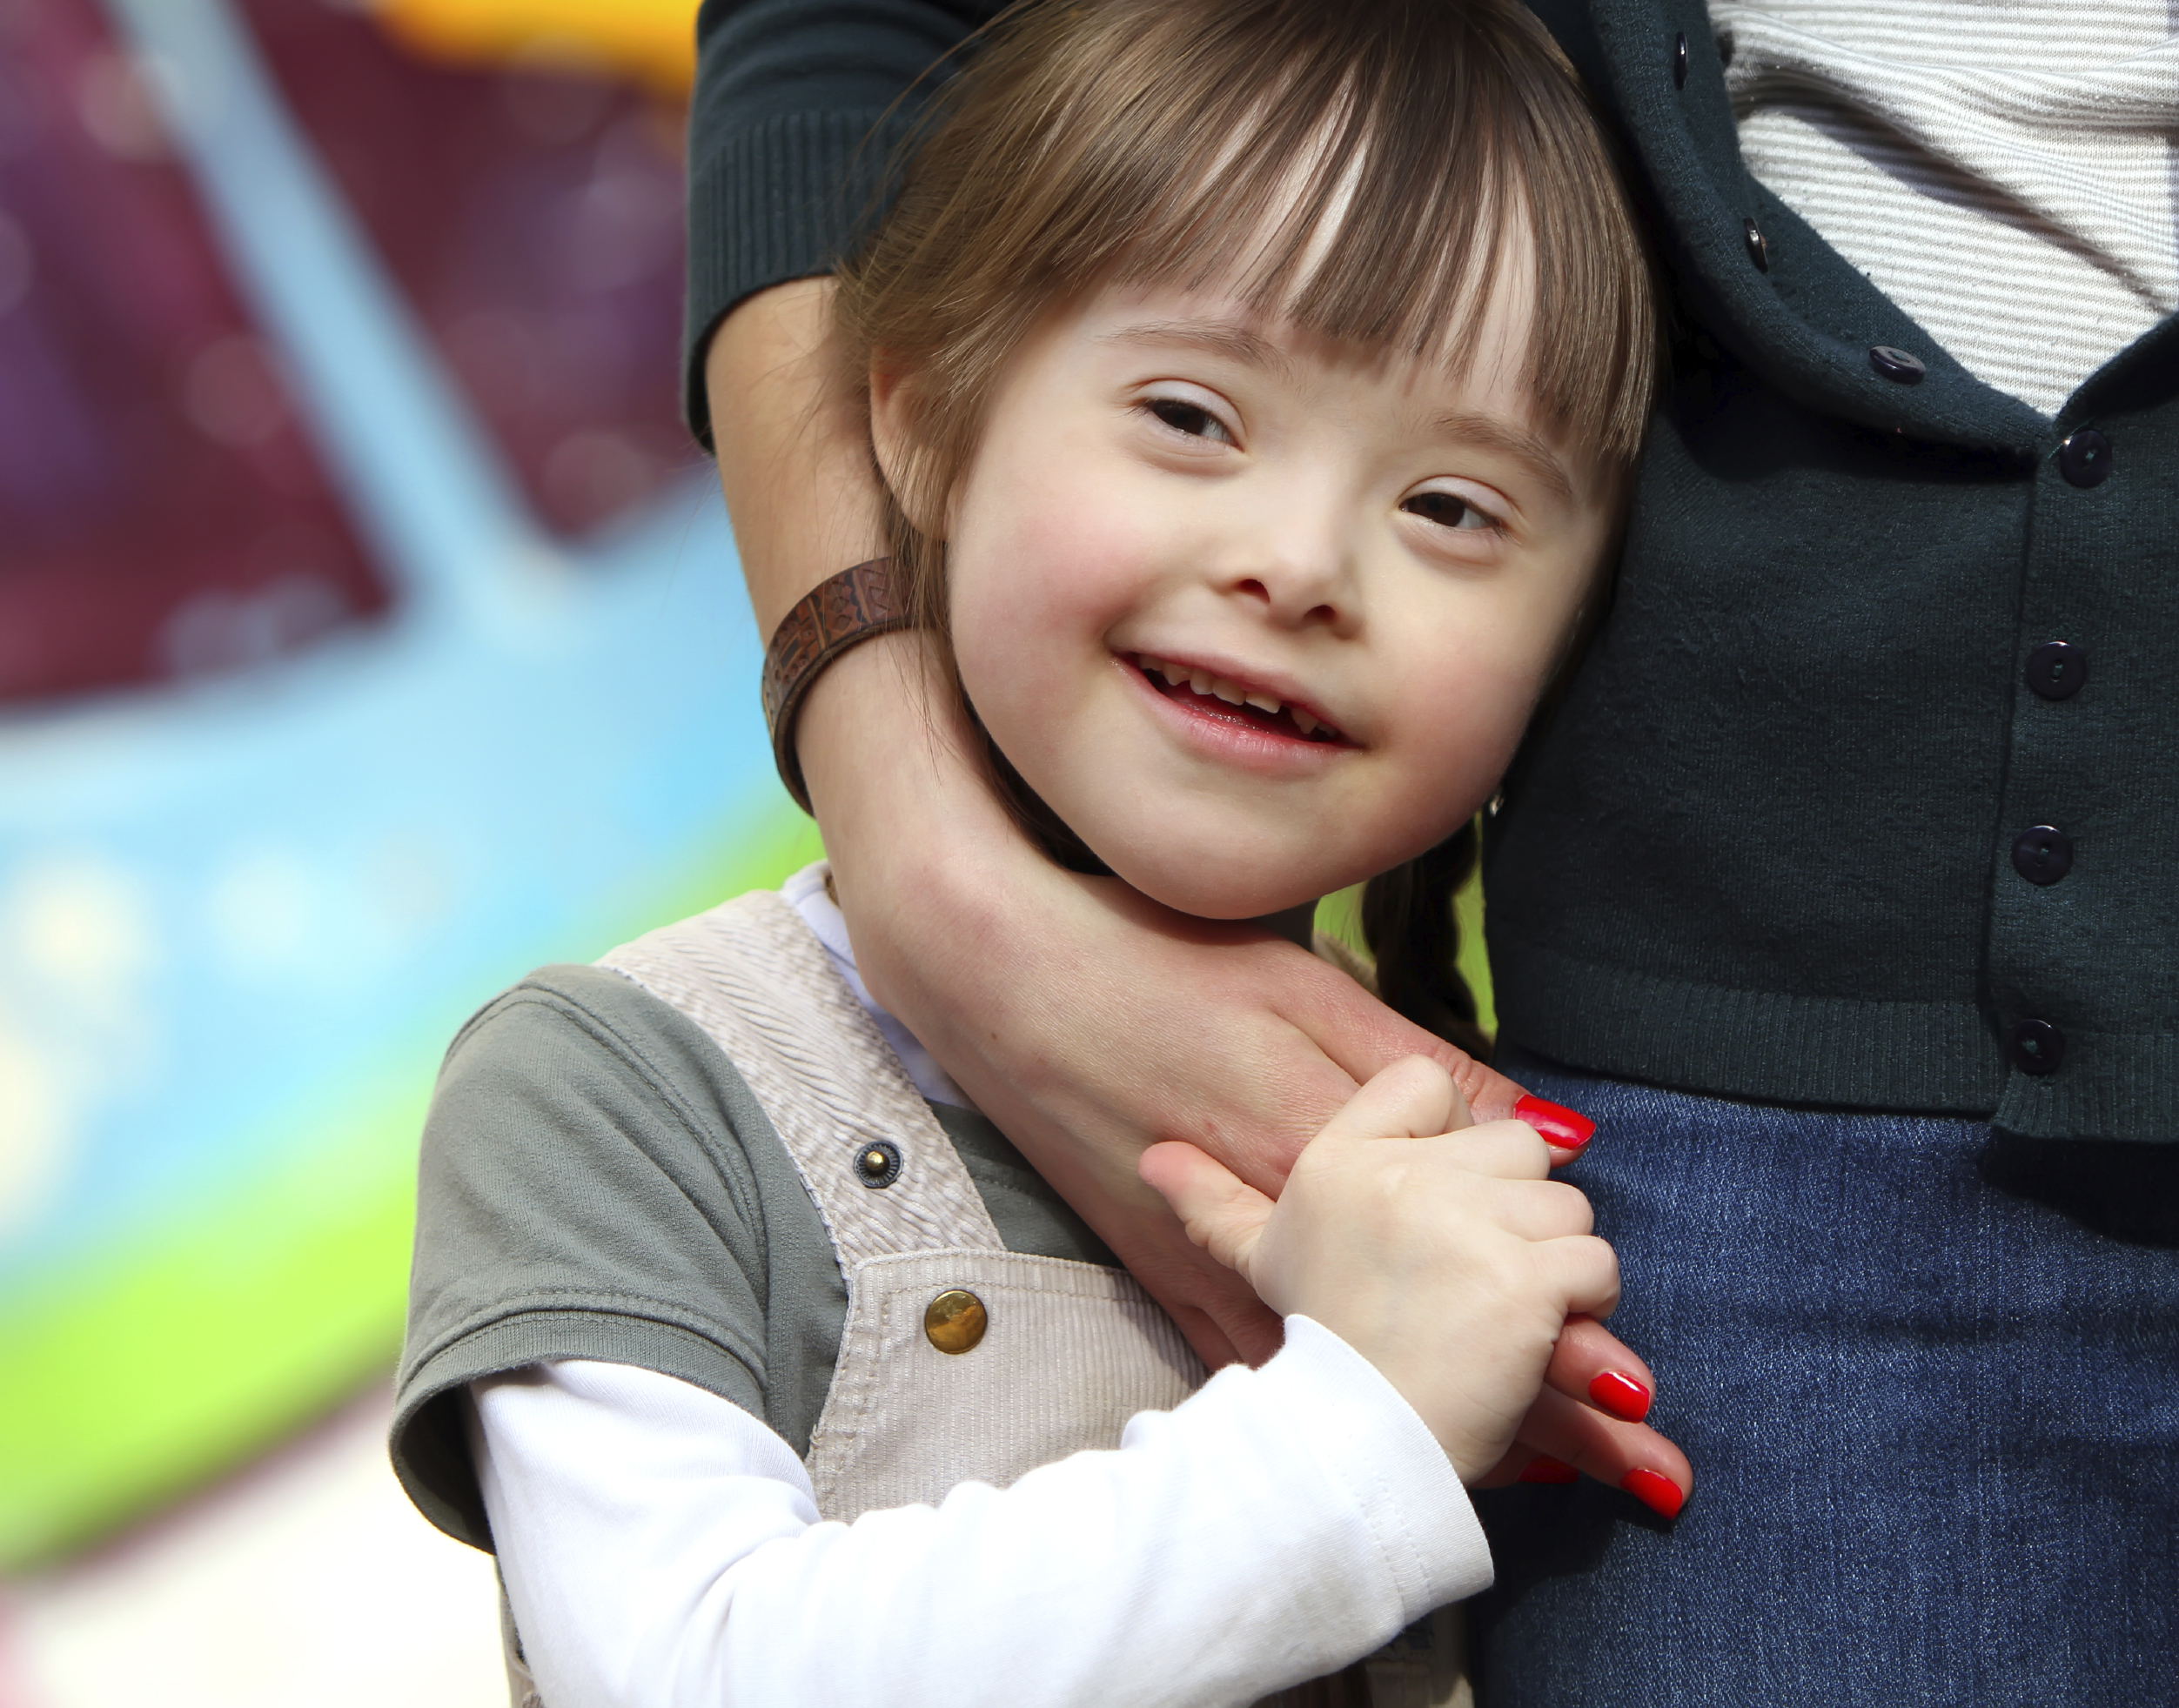 Parenting a Child with Special Needs: Your Education Rights